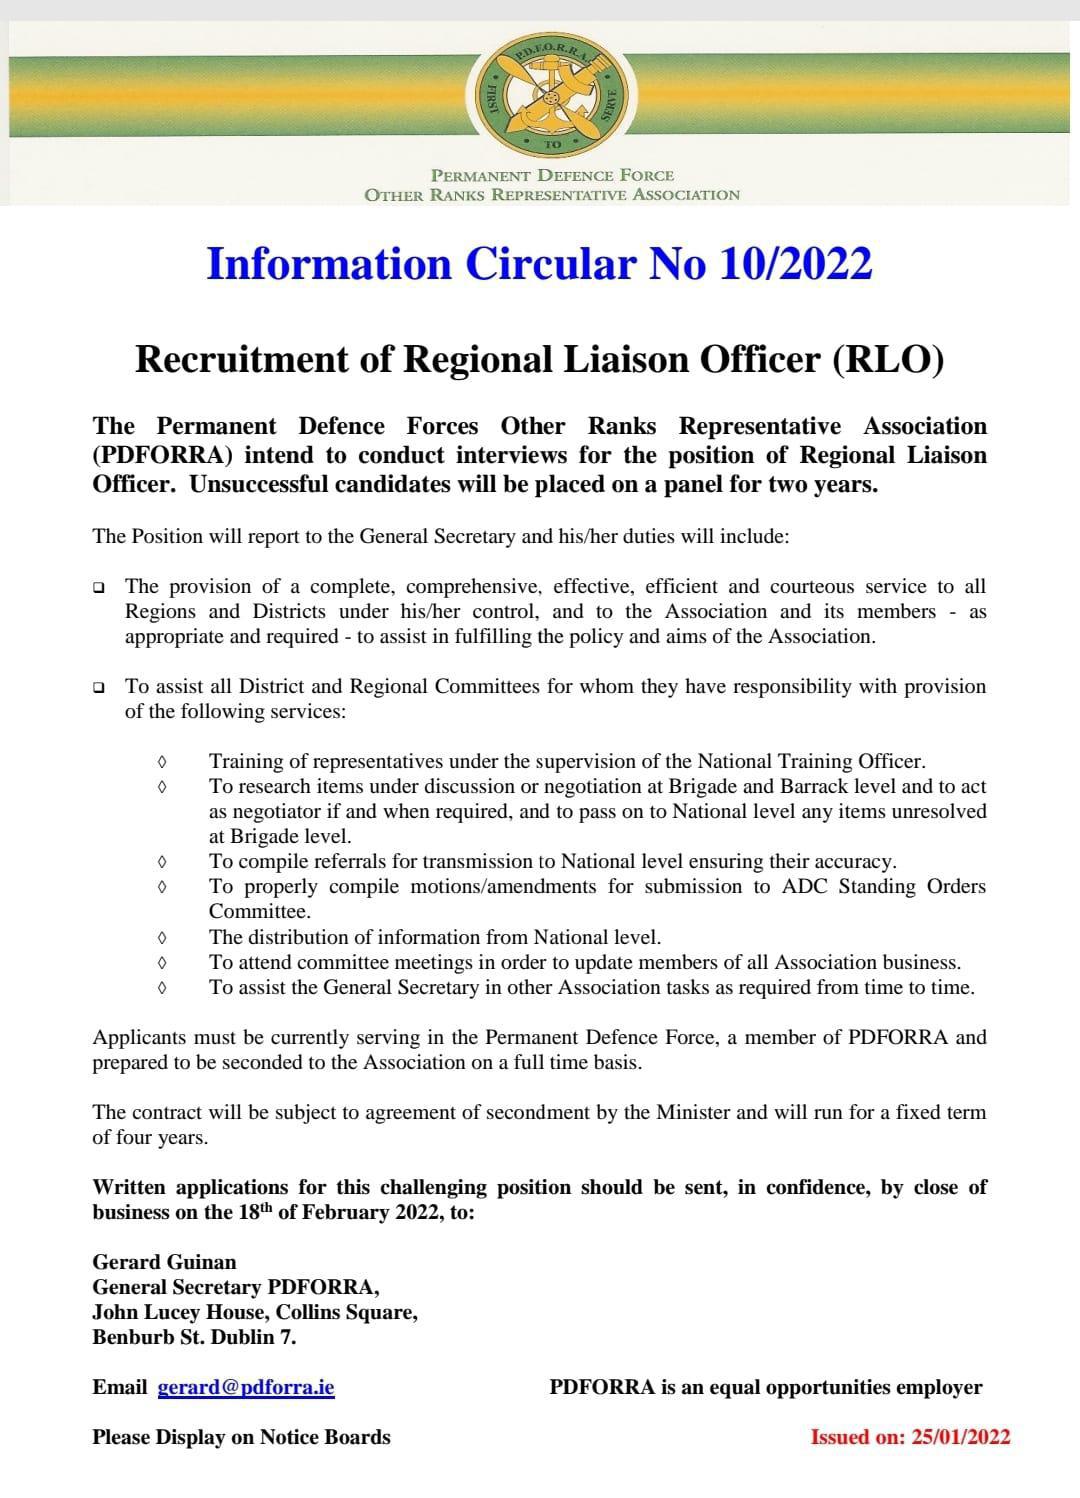 Information Circular No 10 of 22 - Recruitment of Regional Liaison Officer (RLO)